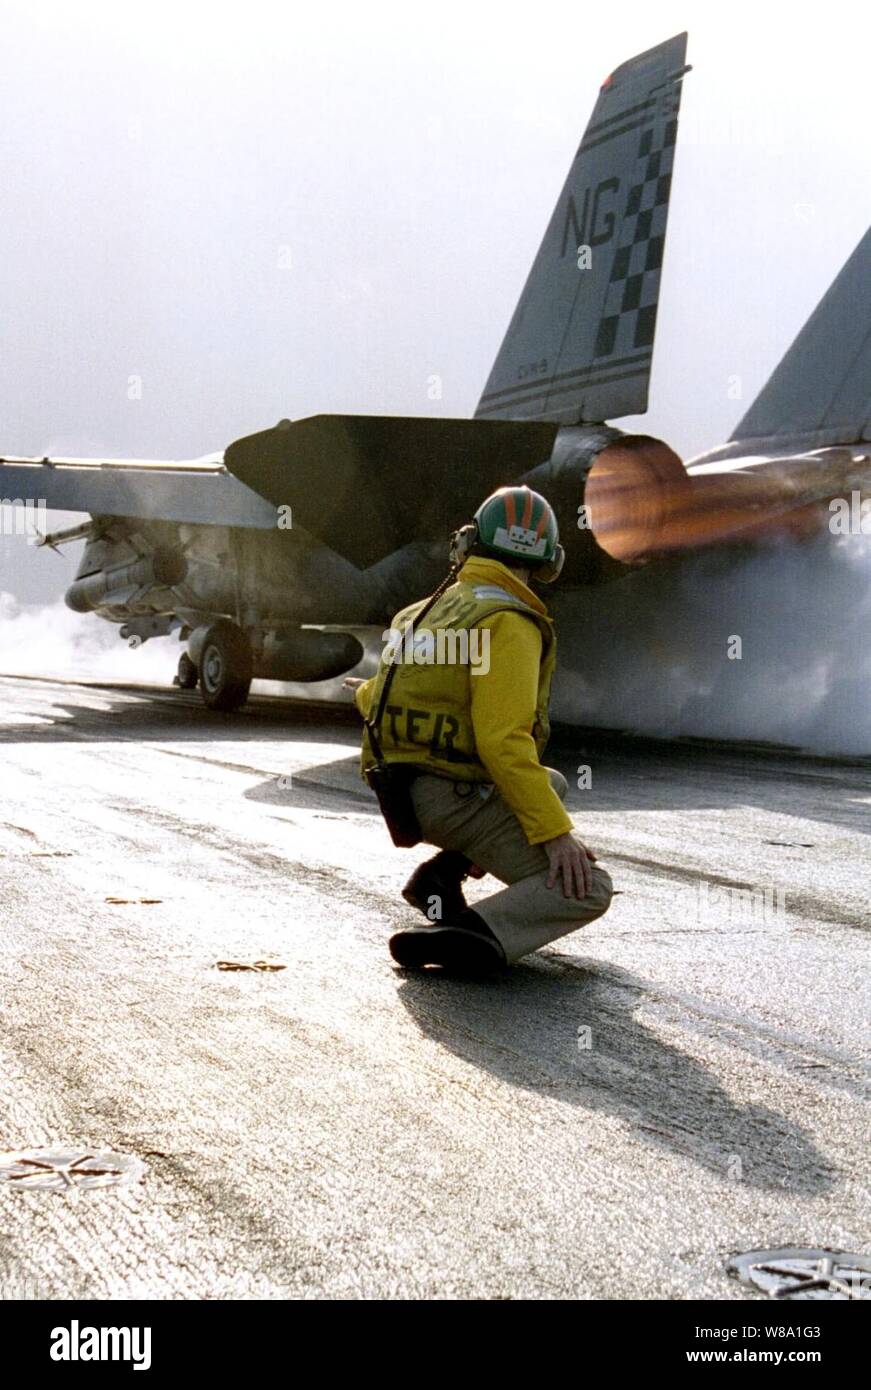 U.S. Navy Lt. Rick Krystof watches an F-14 Tomcat hurtle down the catapult of the aircraft carrier USS Nimitz (CVN 68) on Jan. 29, 1998.  The Nimitz battle group is operating in the Persian Gulf in support of Operation Southern Watch which is the U.S. and coalition enforcement of the no-fly-zone over Southern Iraq.  Krystof  is from Westford, Mass. Stock Photo